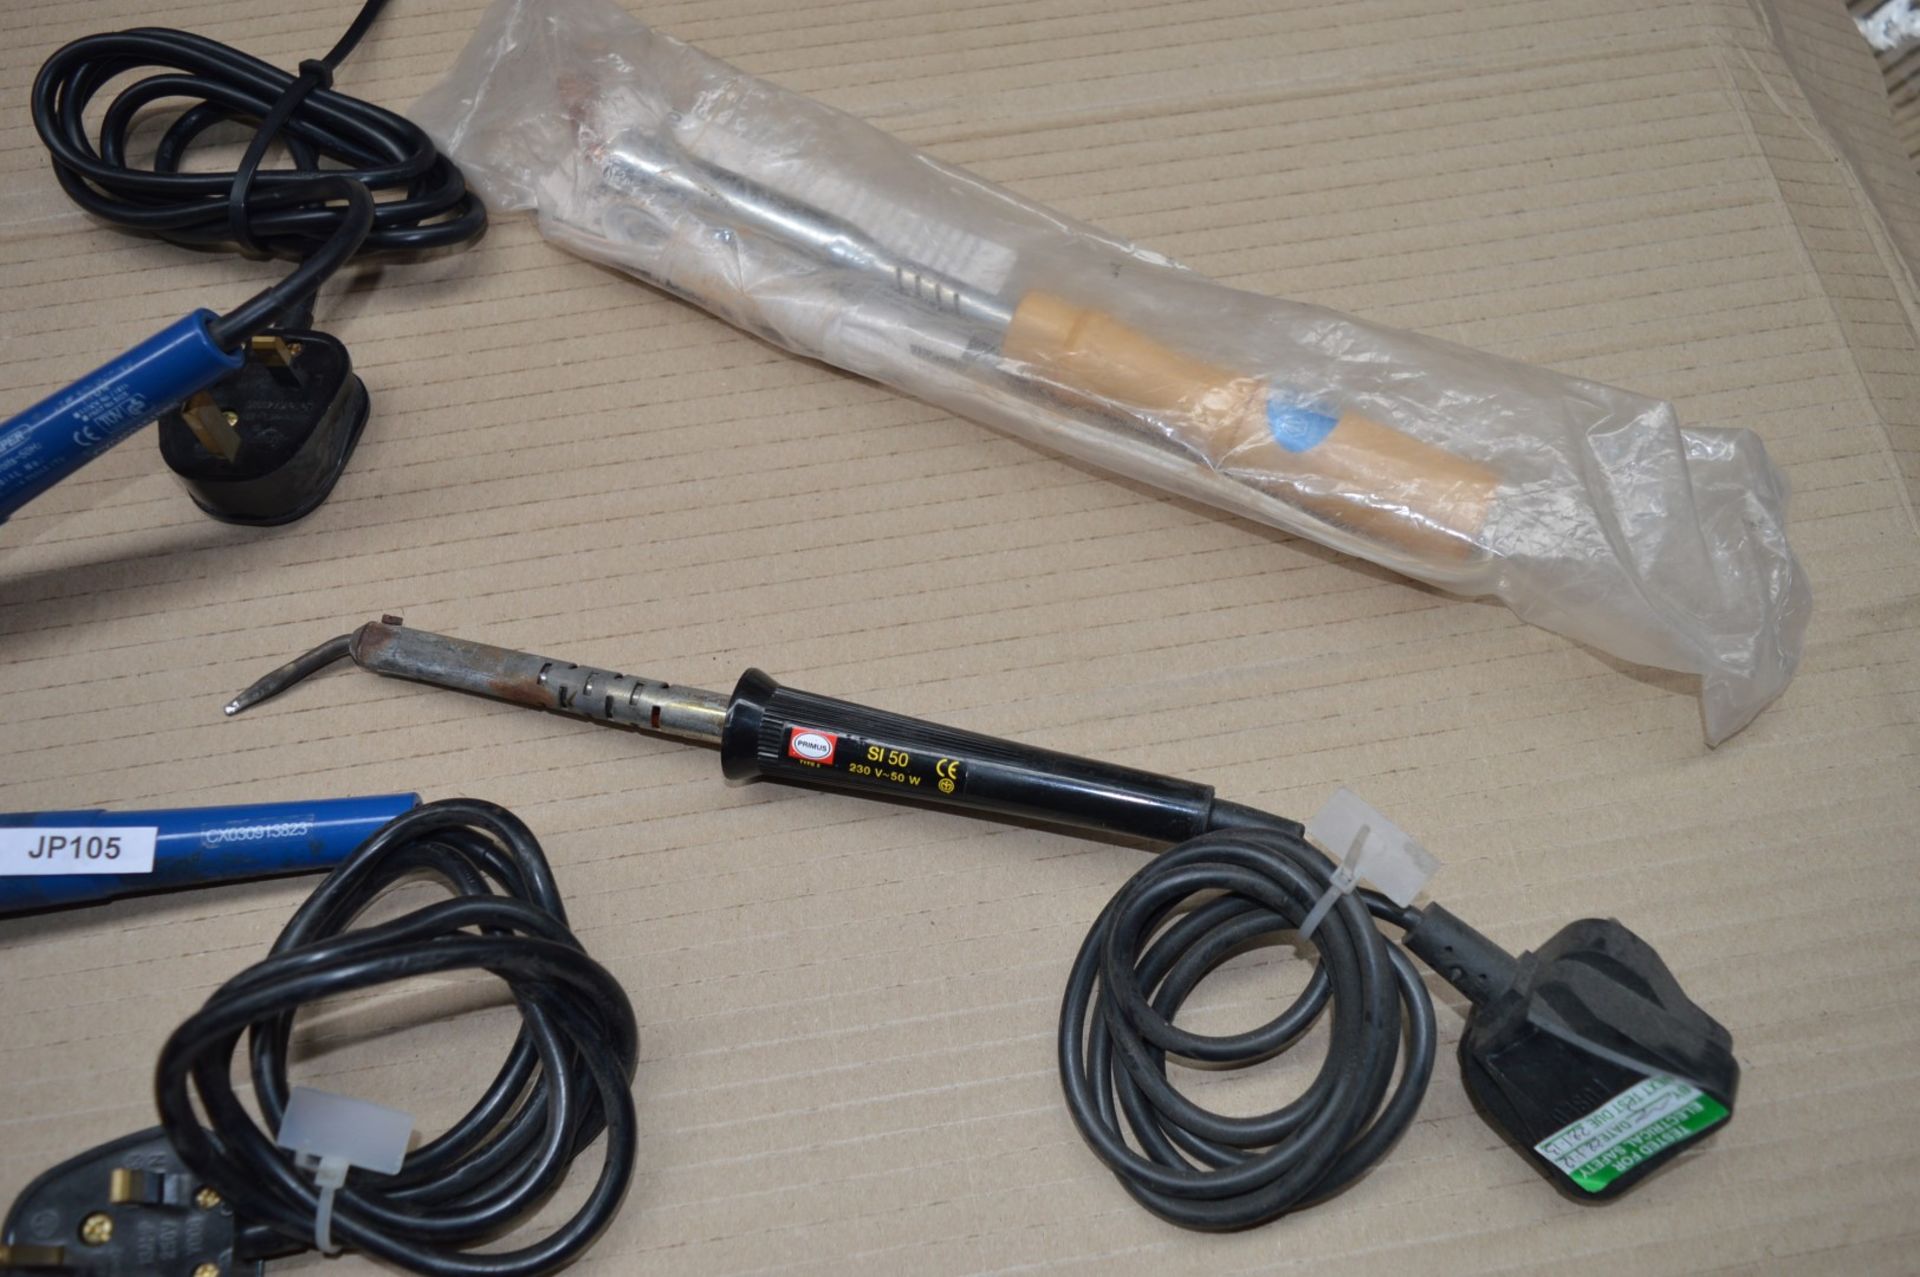 6 x Various 240v Soldering Irons - Brands Include Weller and Draper - CL300 - Ref JP105 - - Image 13 of 22